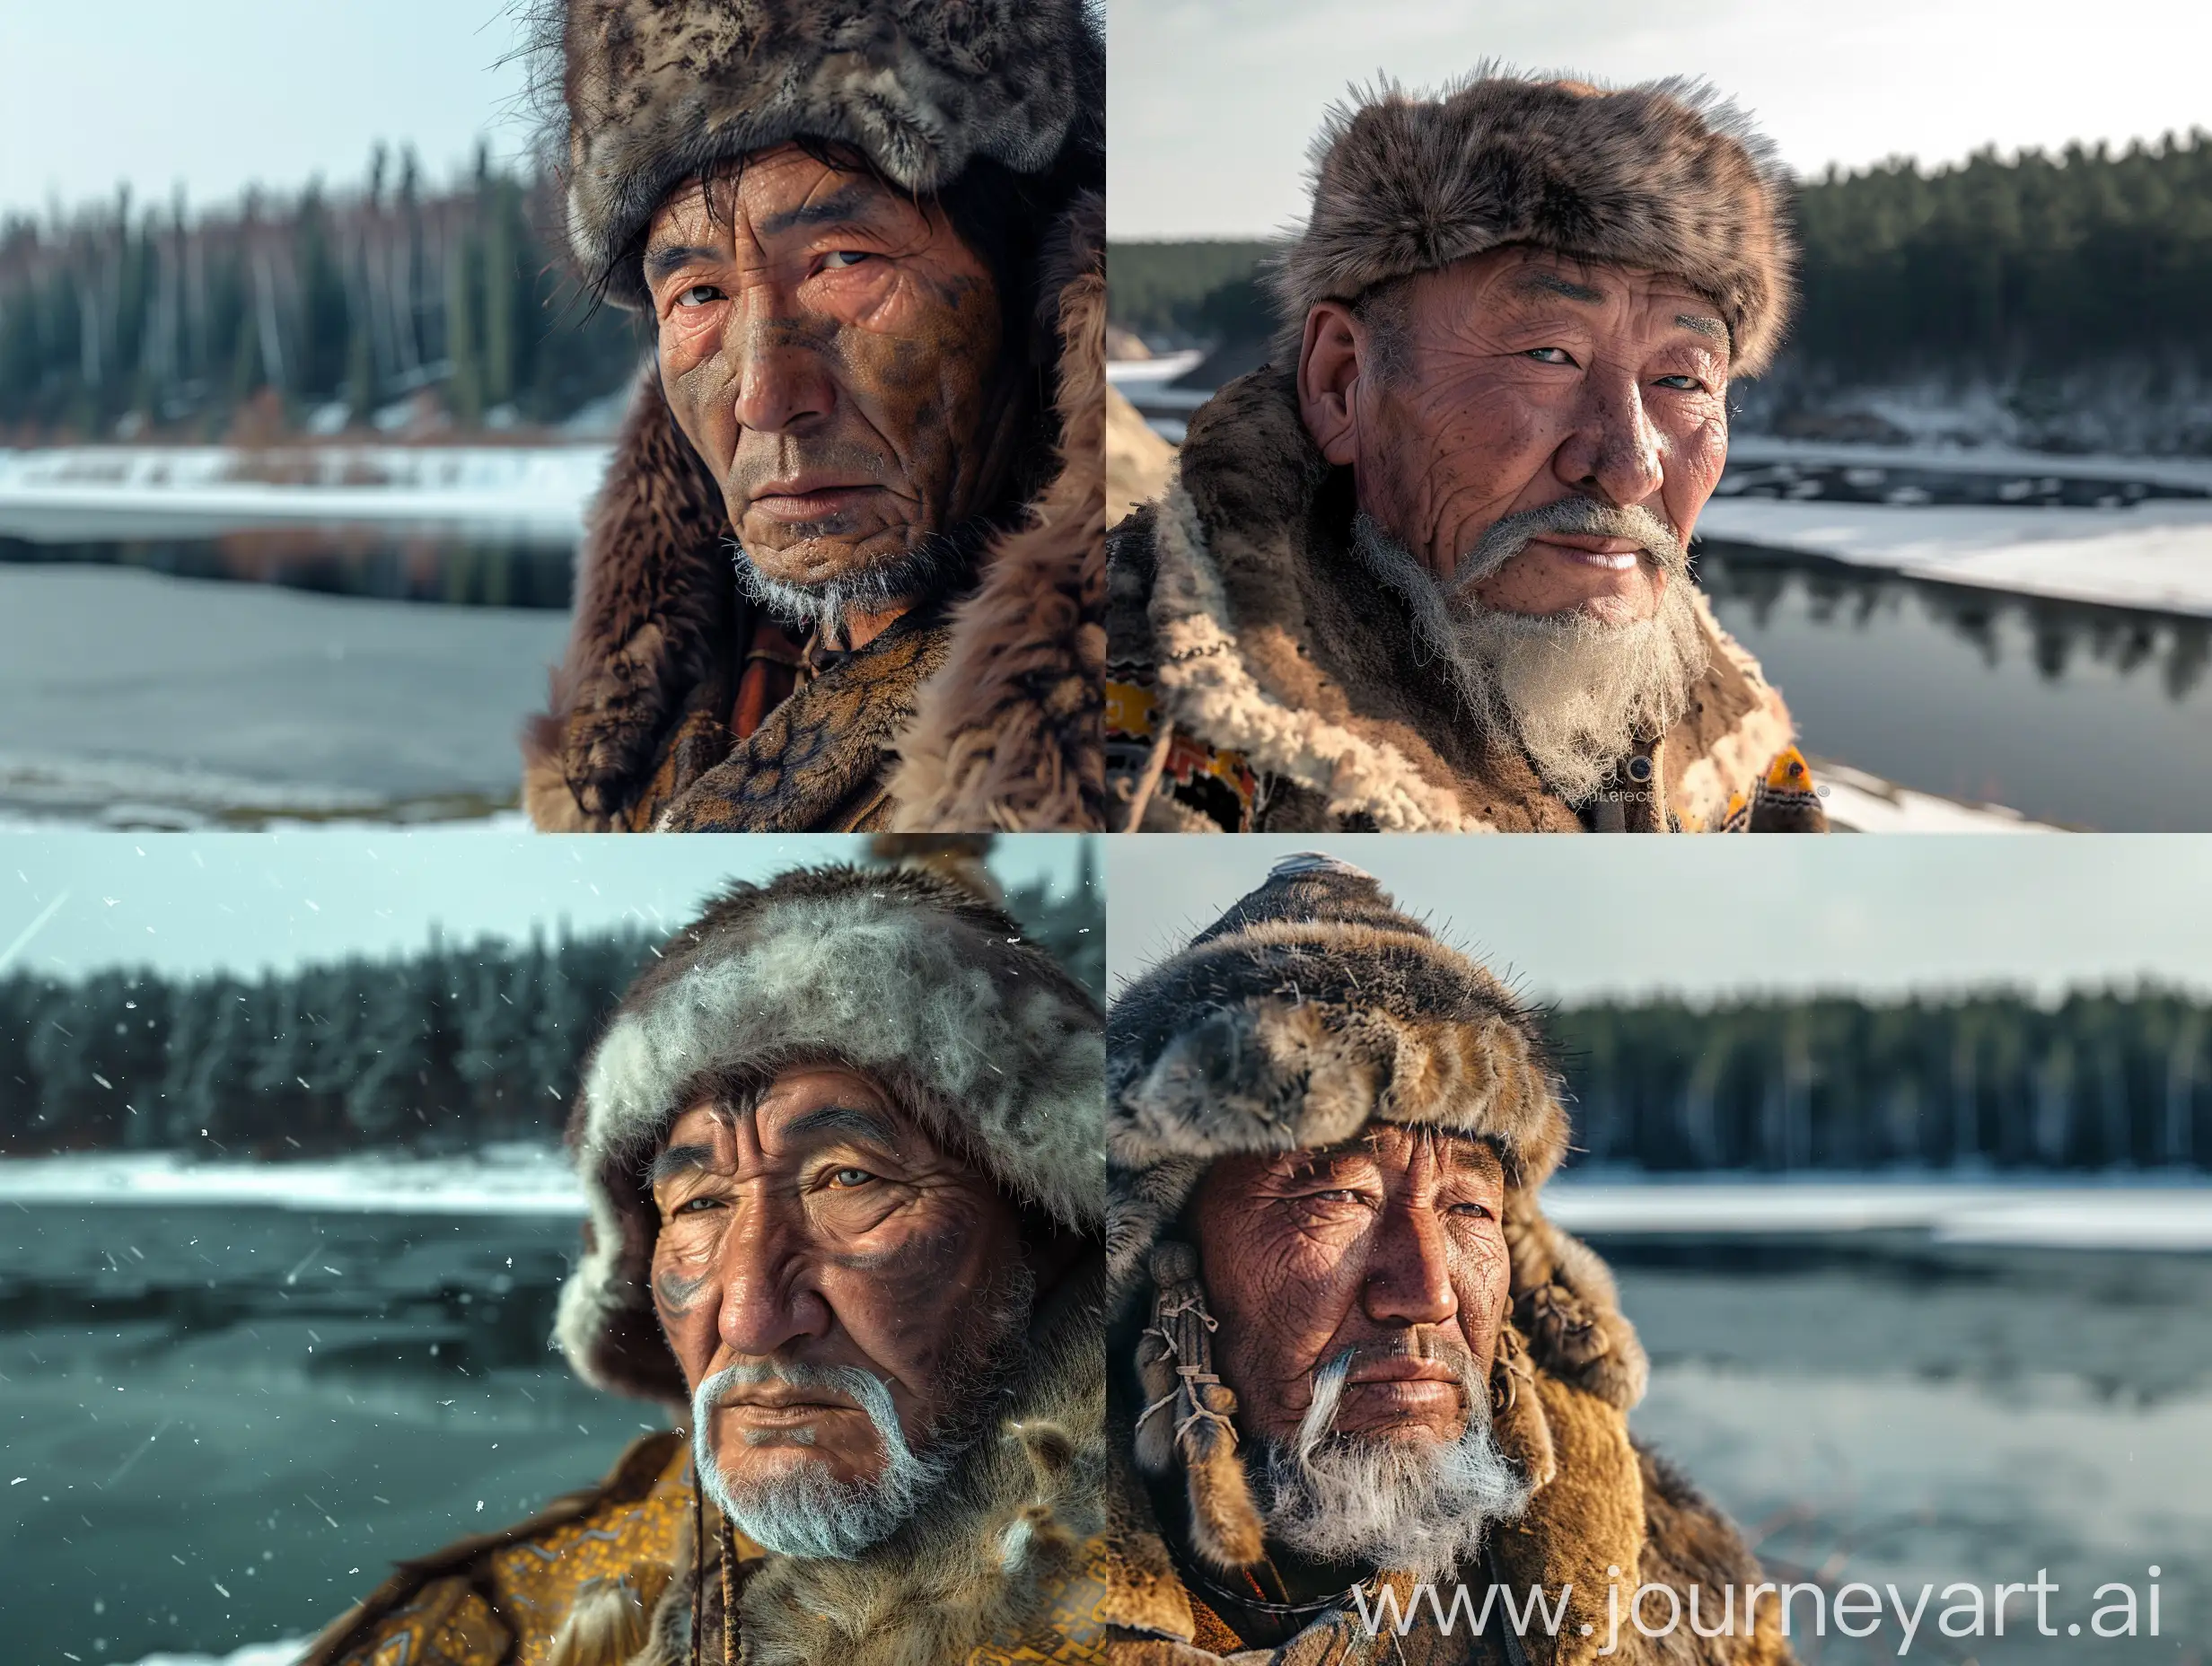 A handsome and wise mongol shaman, 8K, shot on Canon, detailed, photorealistic, at bright day, recognizable look, near the big pond embankment with a dense forest in the distance, in the winter, closeup